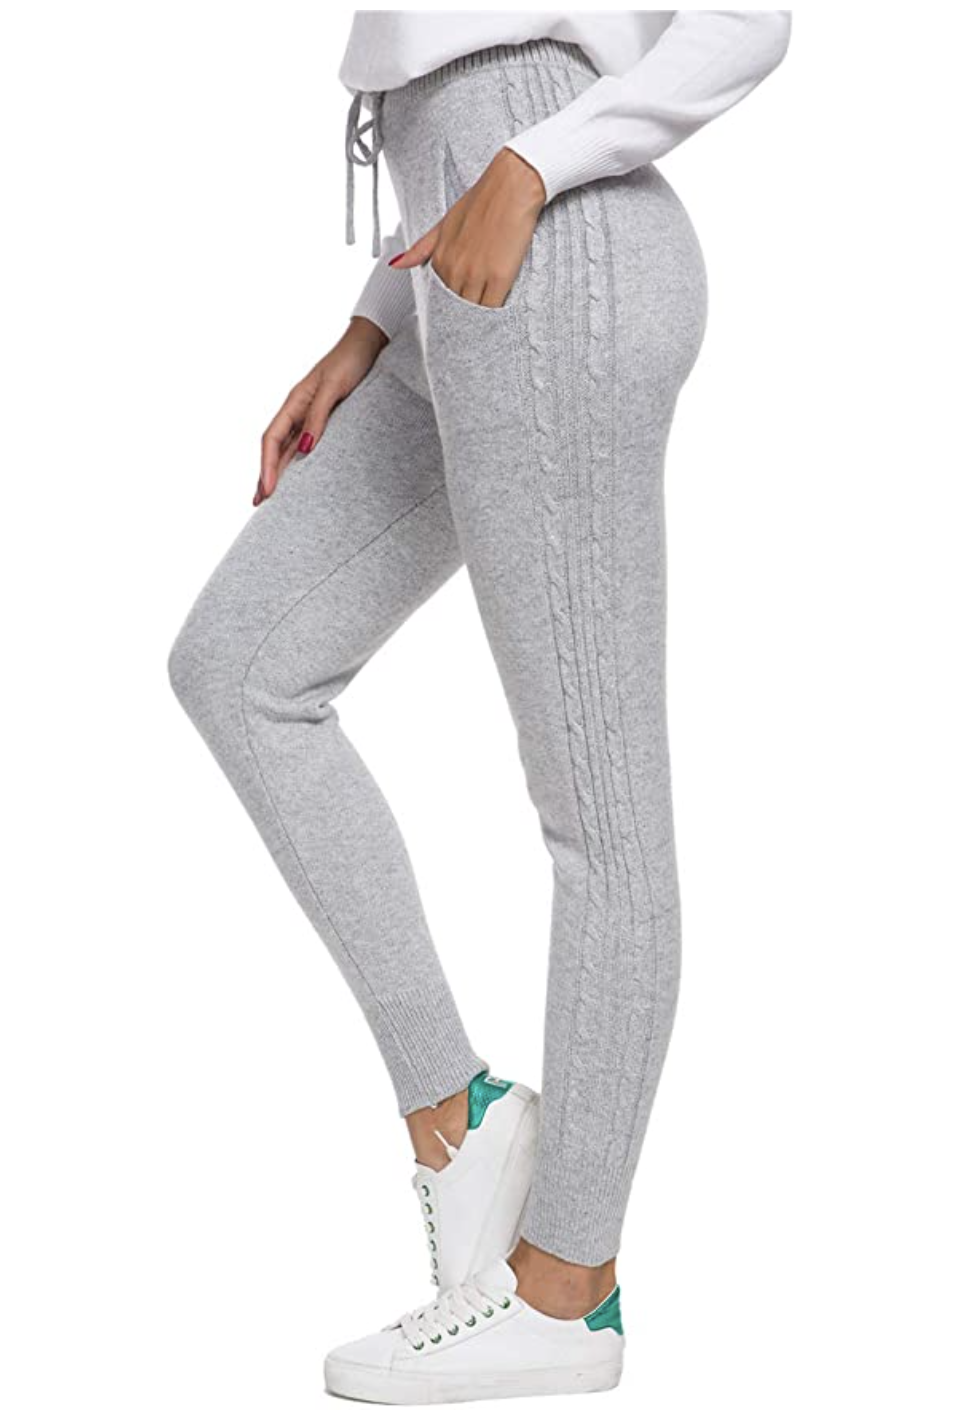 Daimidy Cashmere Joggers Are Under $40 and We're Buying Every